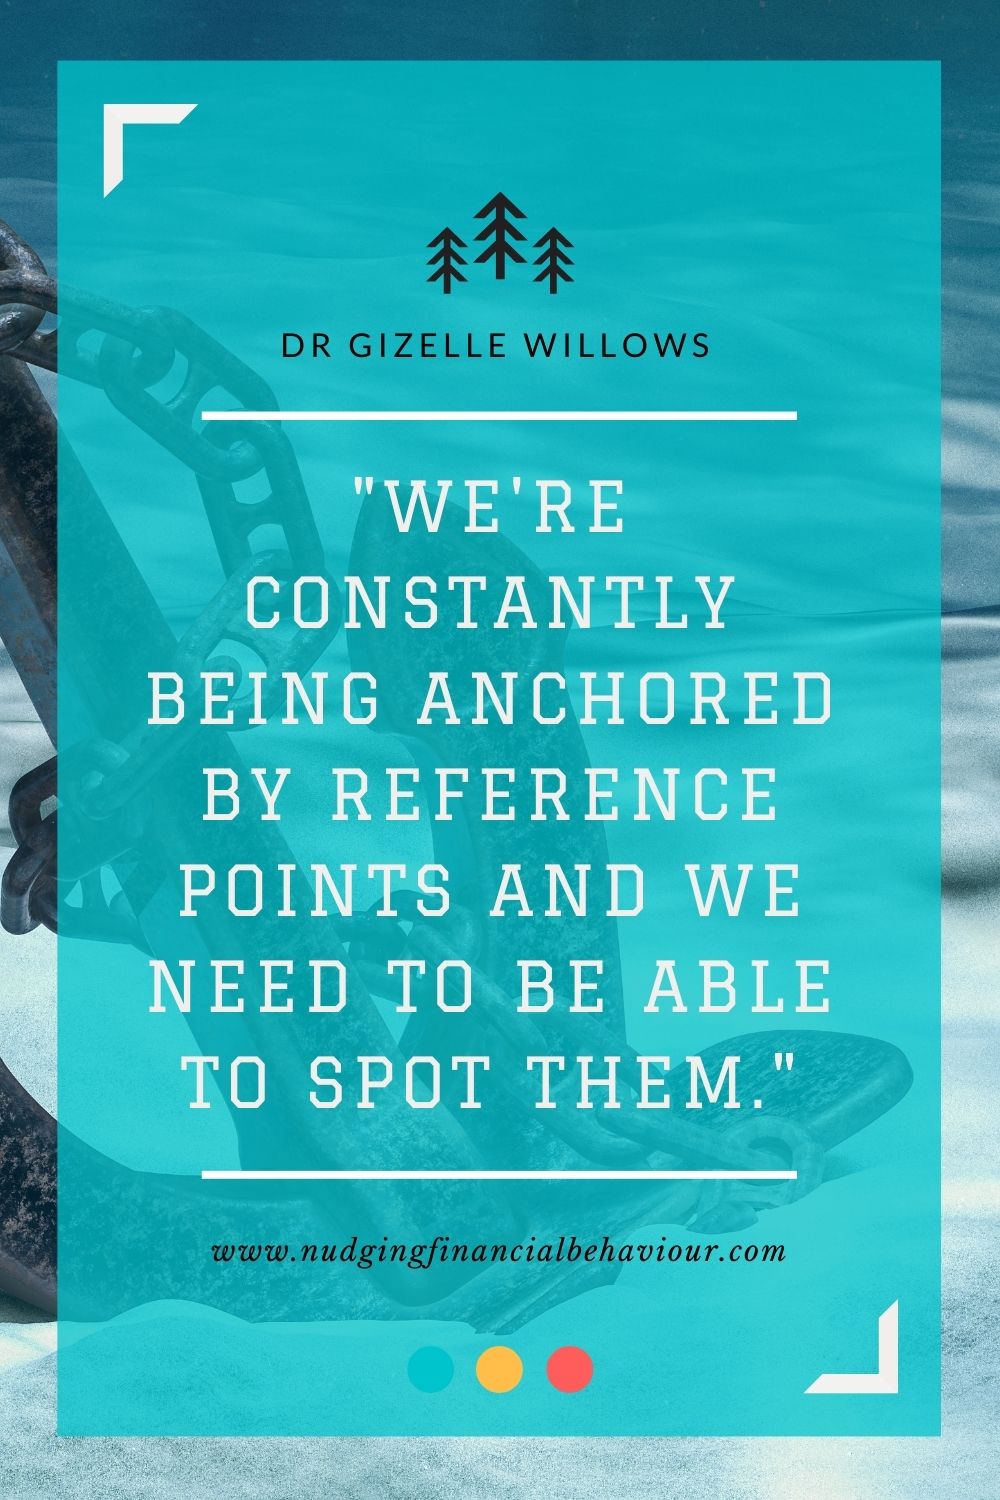 Anchoring quote by Dr Gizelle Willows